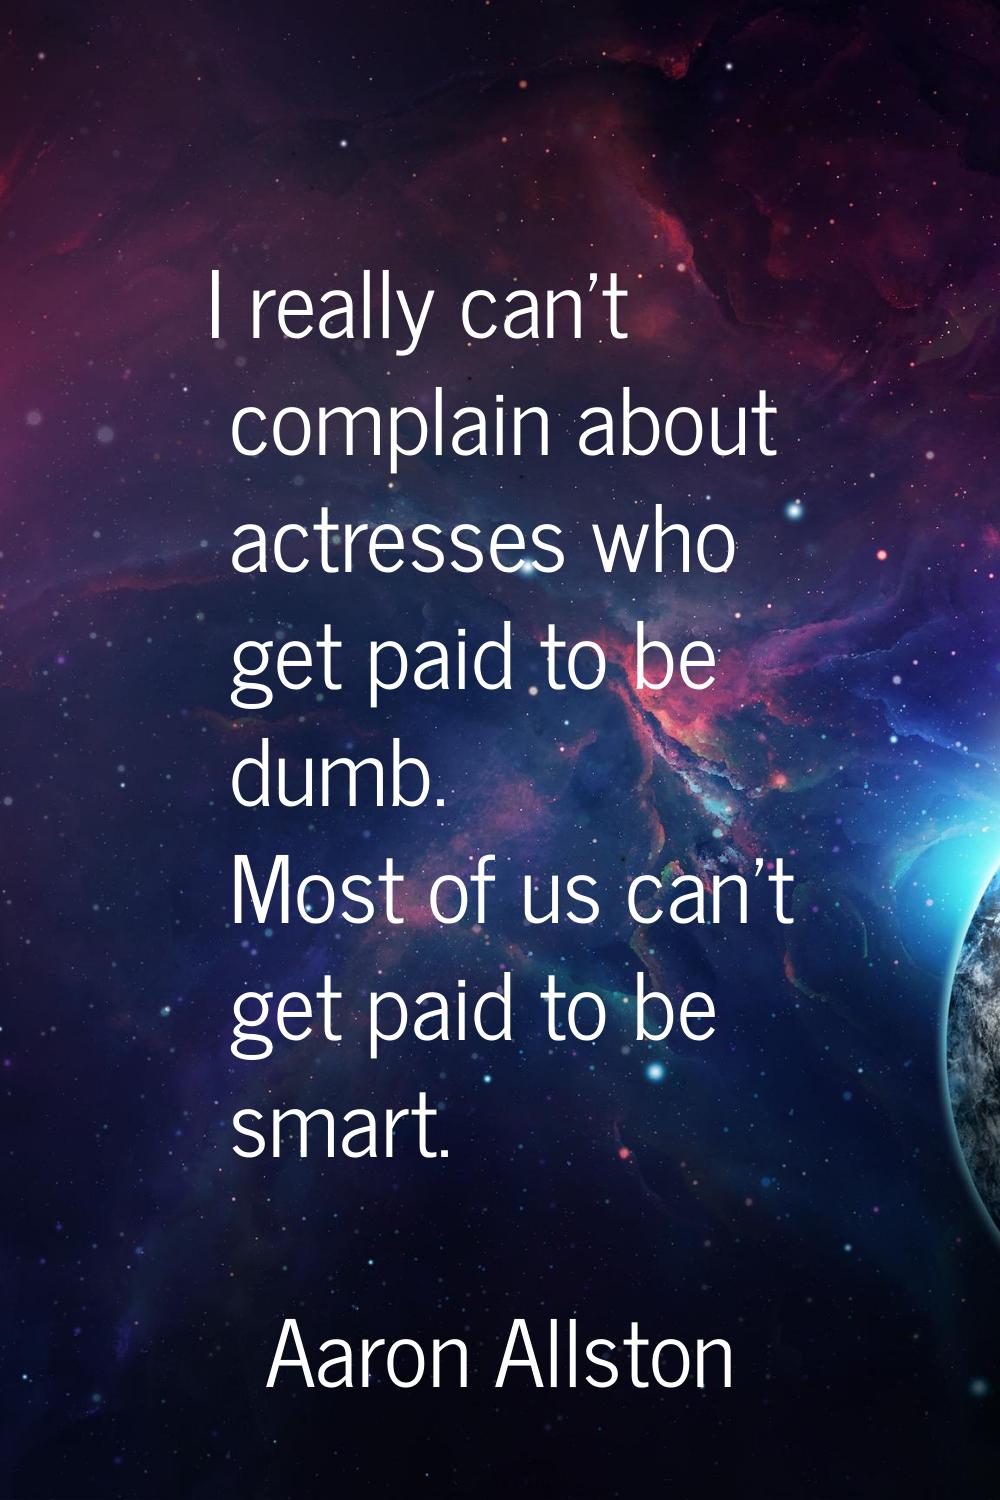 I really can't complain about actresses who get paid to be dumb. Most of us can't get paid to be sm